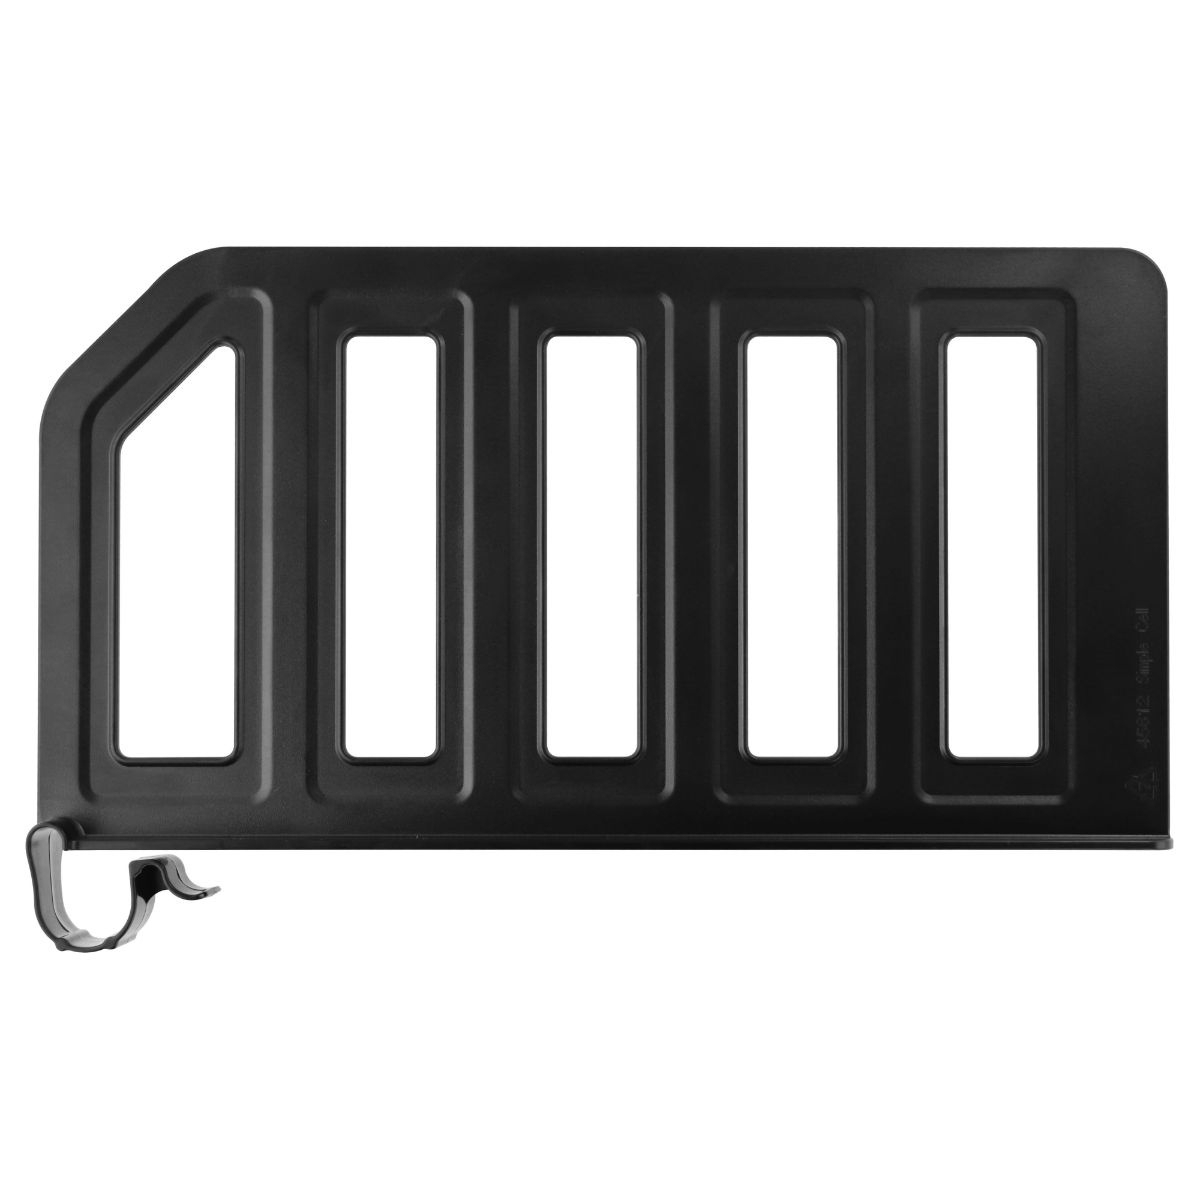 Shelf Separator / Divider With Snap On Clip (12-inch X 6-inch) - Black